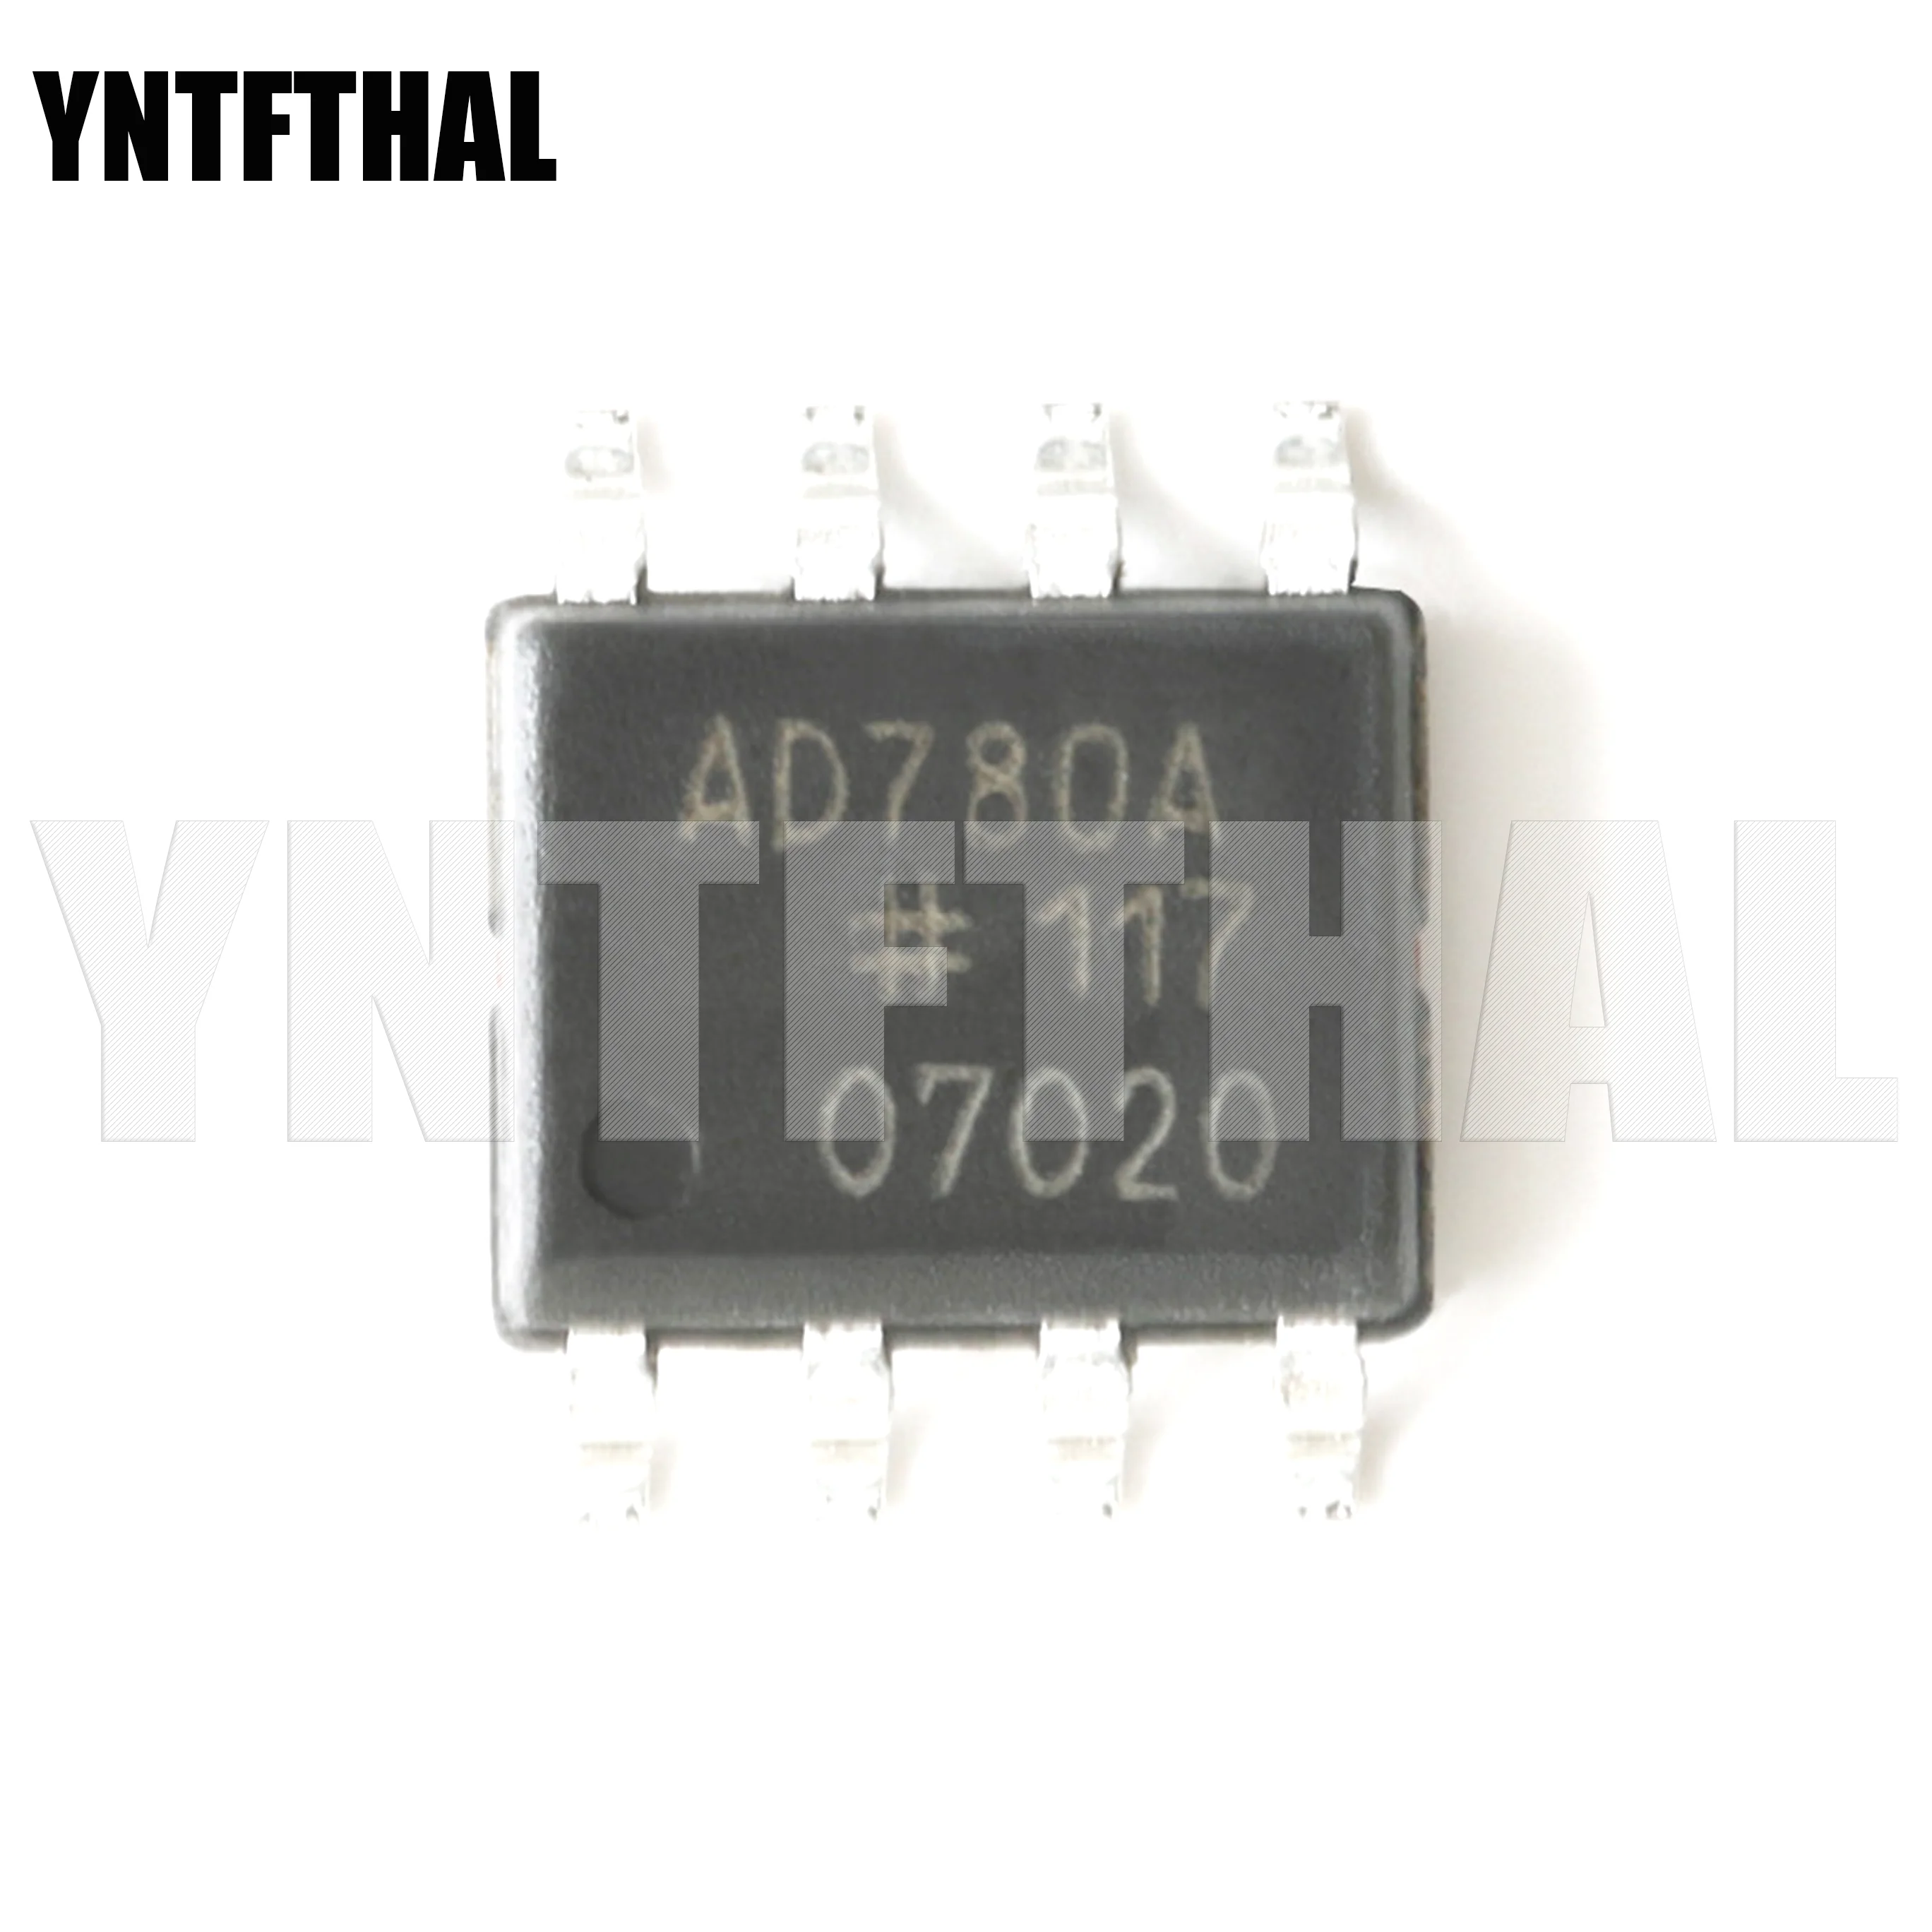 

5pcs New 100% Tested AD780ARZ-REEL7 SOIC-8 High Precision Bandgap Voltage Reference IC Chip